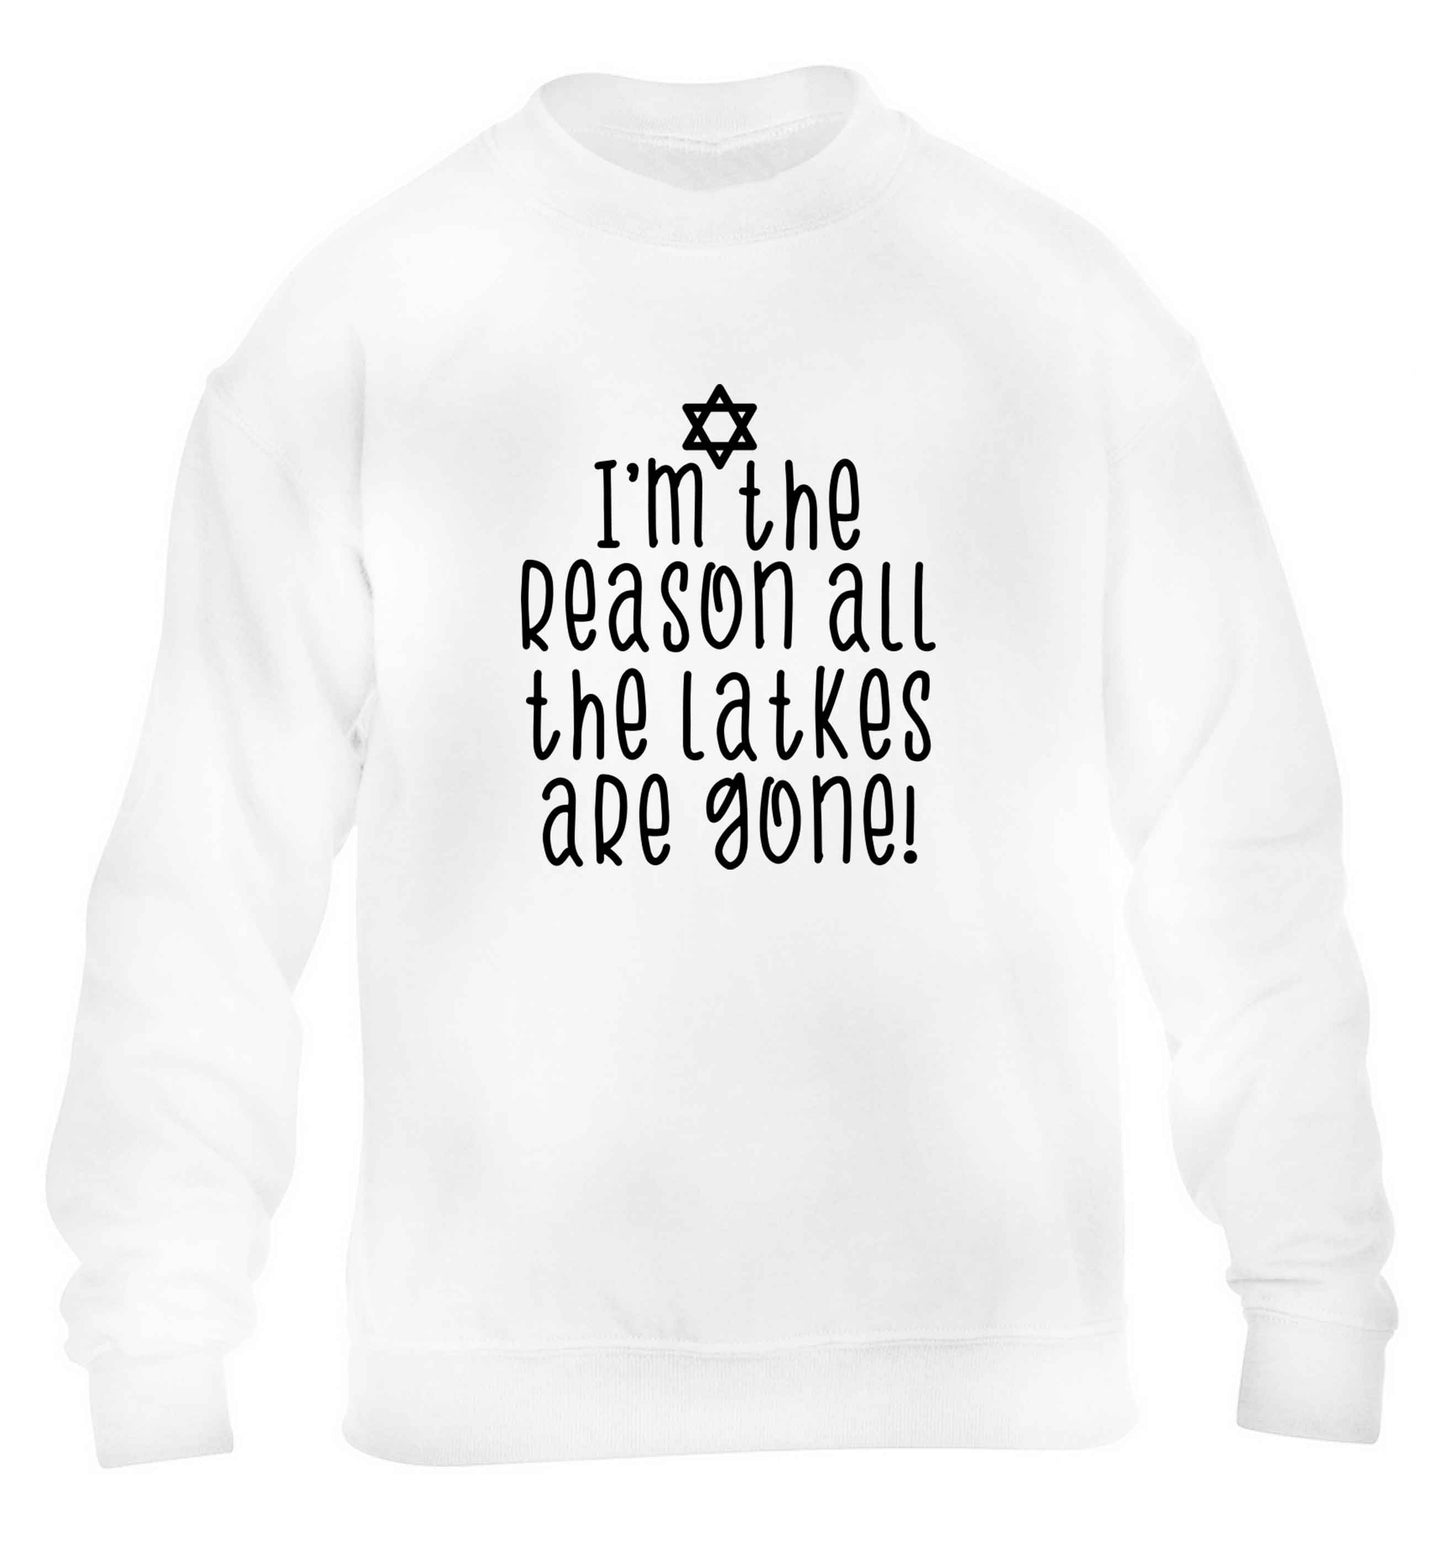 I'm the reason all the latkes are gone children's white sweater 12-13 Years